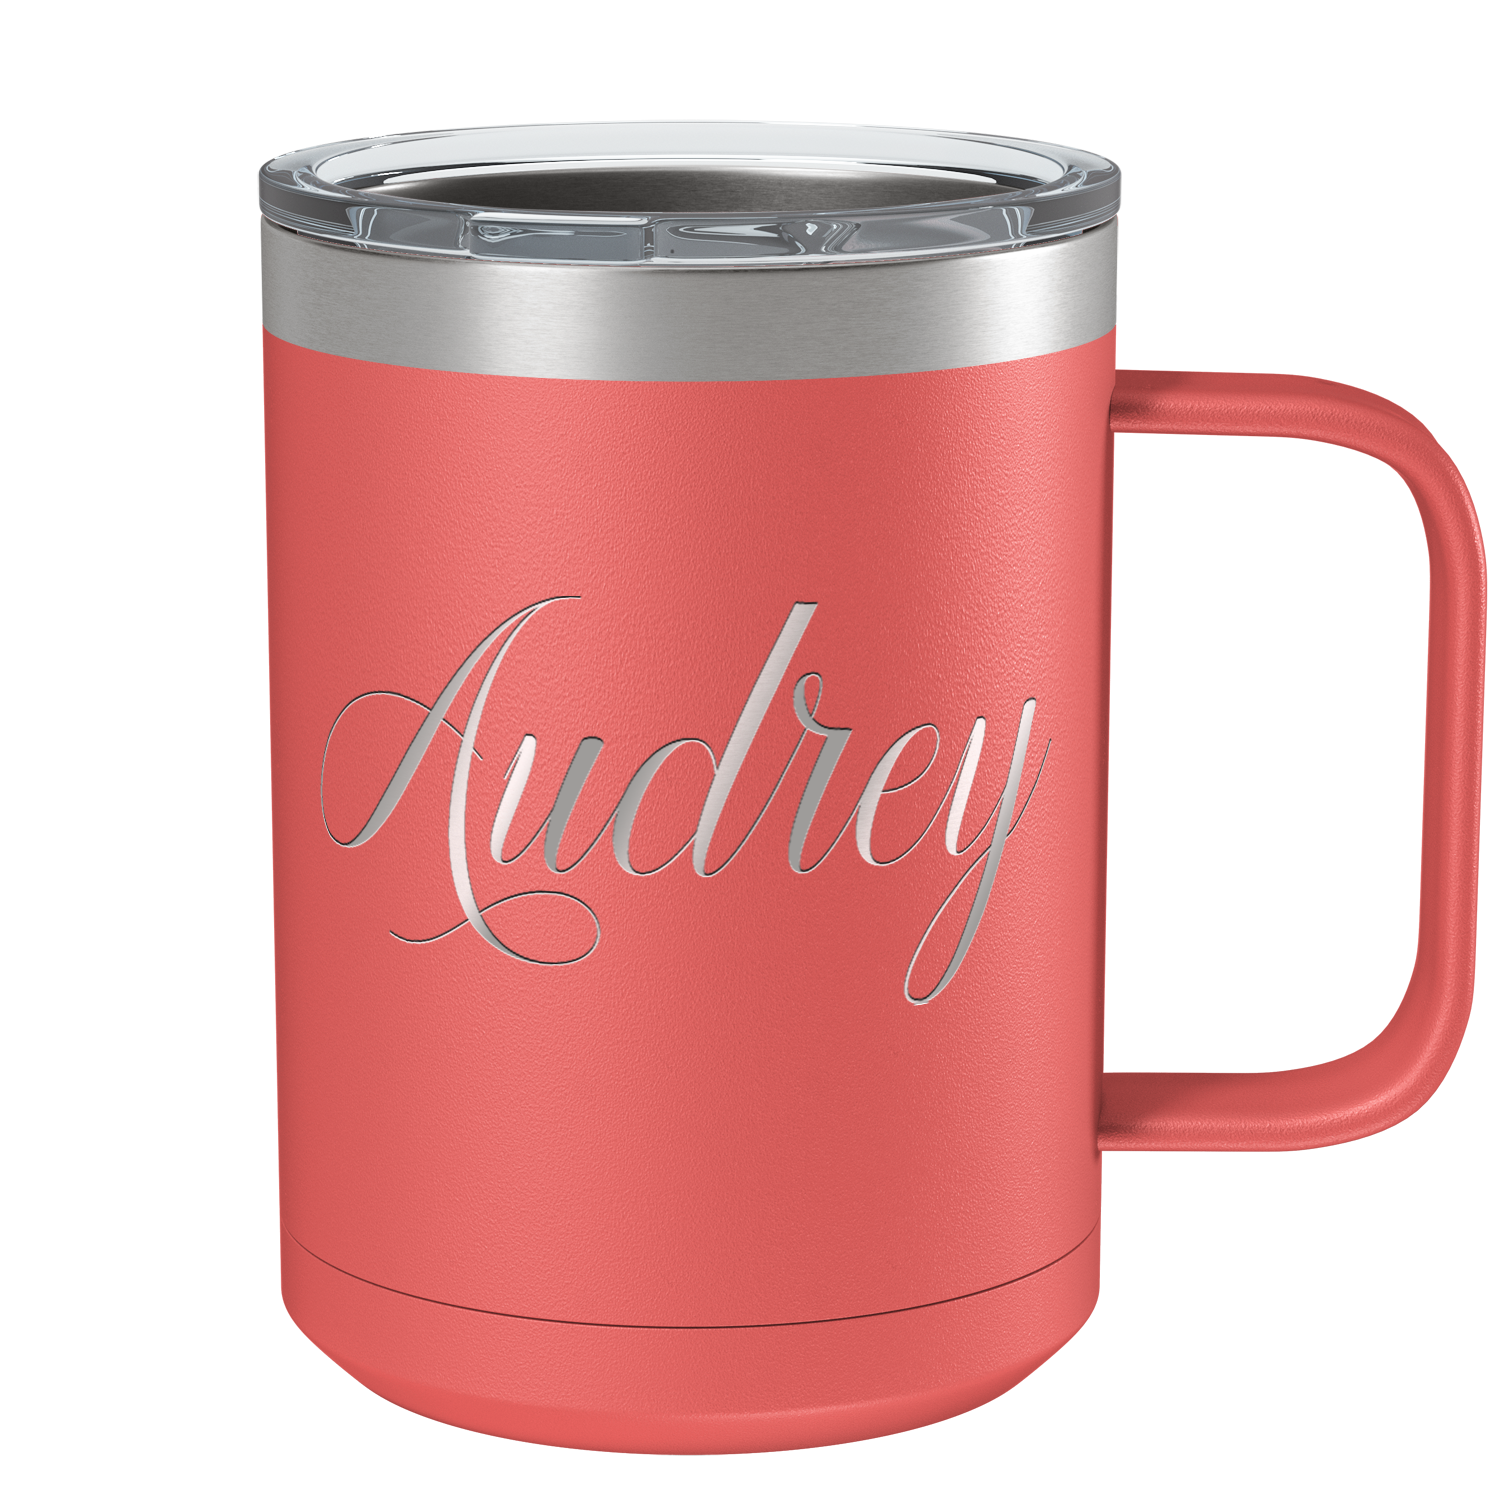 Cuptify Personalized Engraved 15 oz Stainless Steel Coffee Mug - Guava